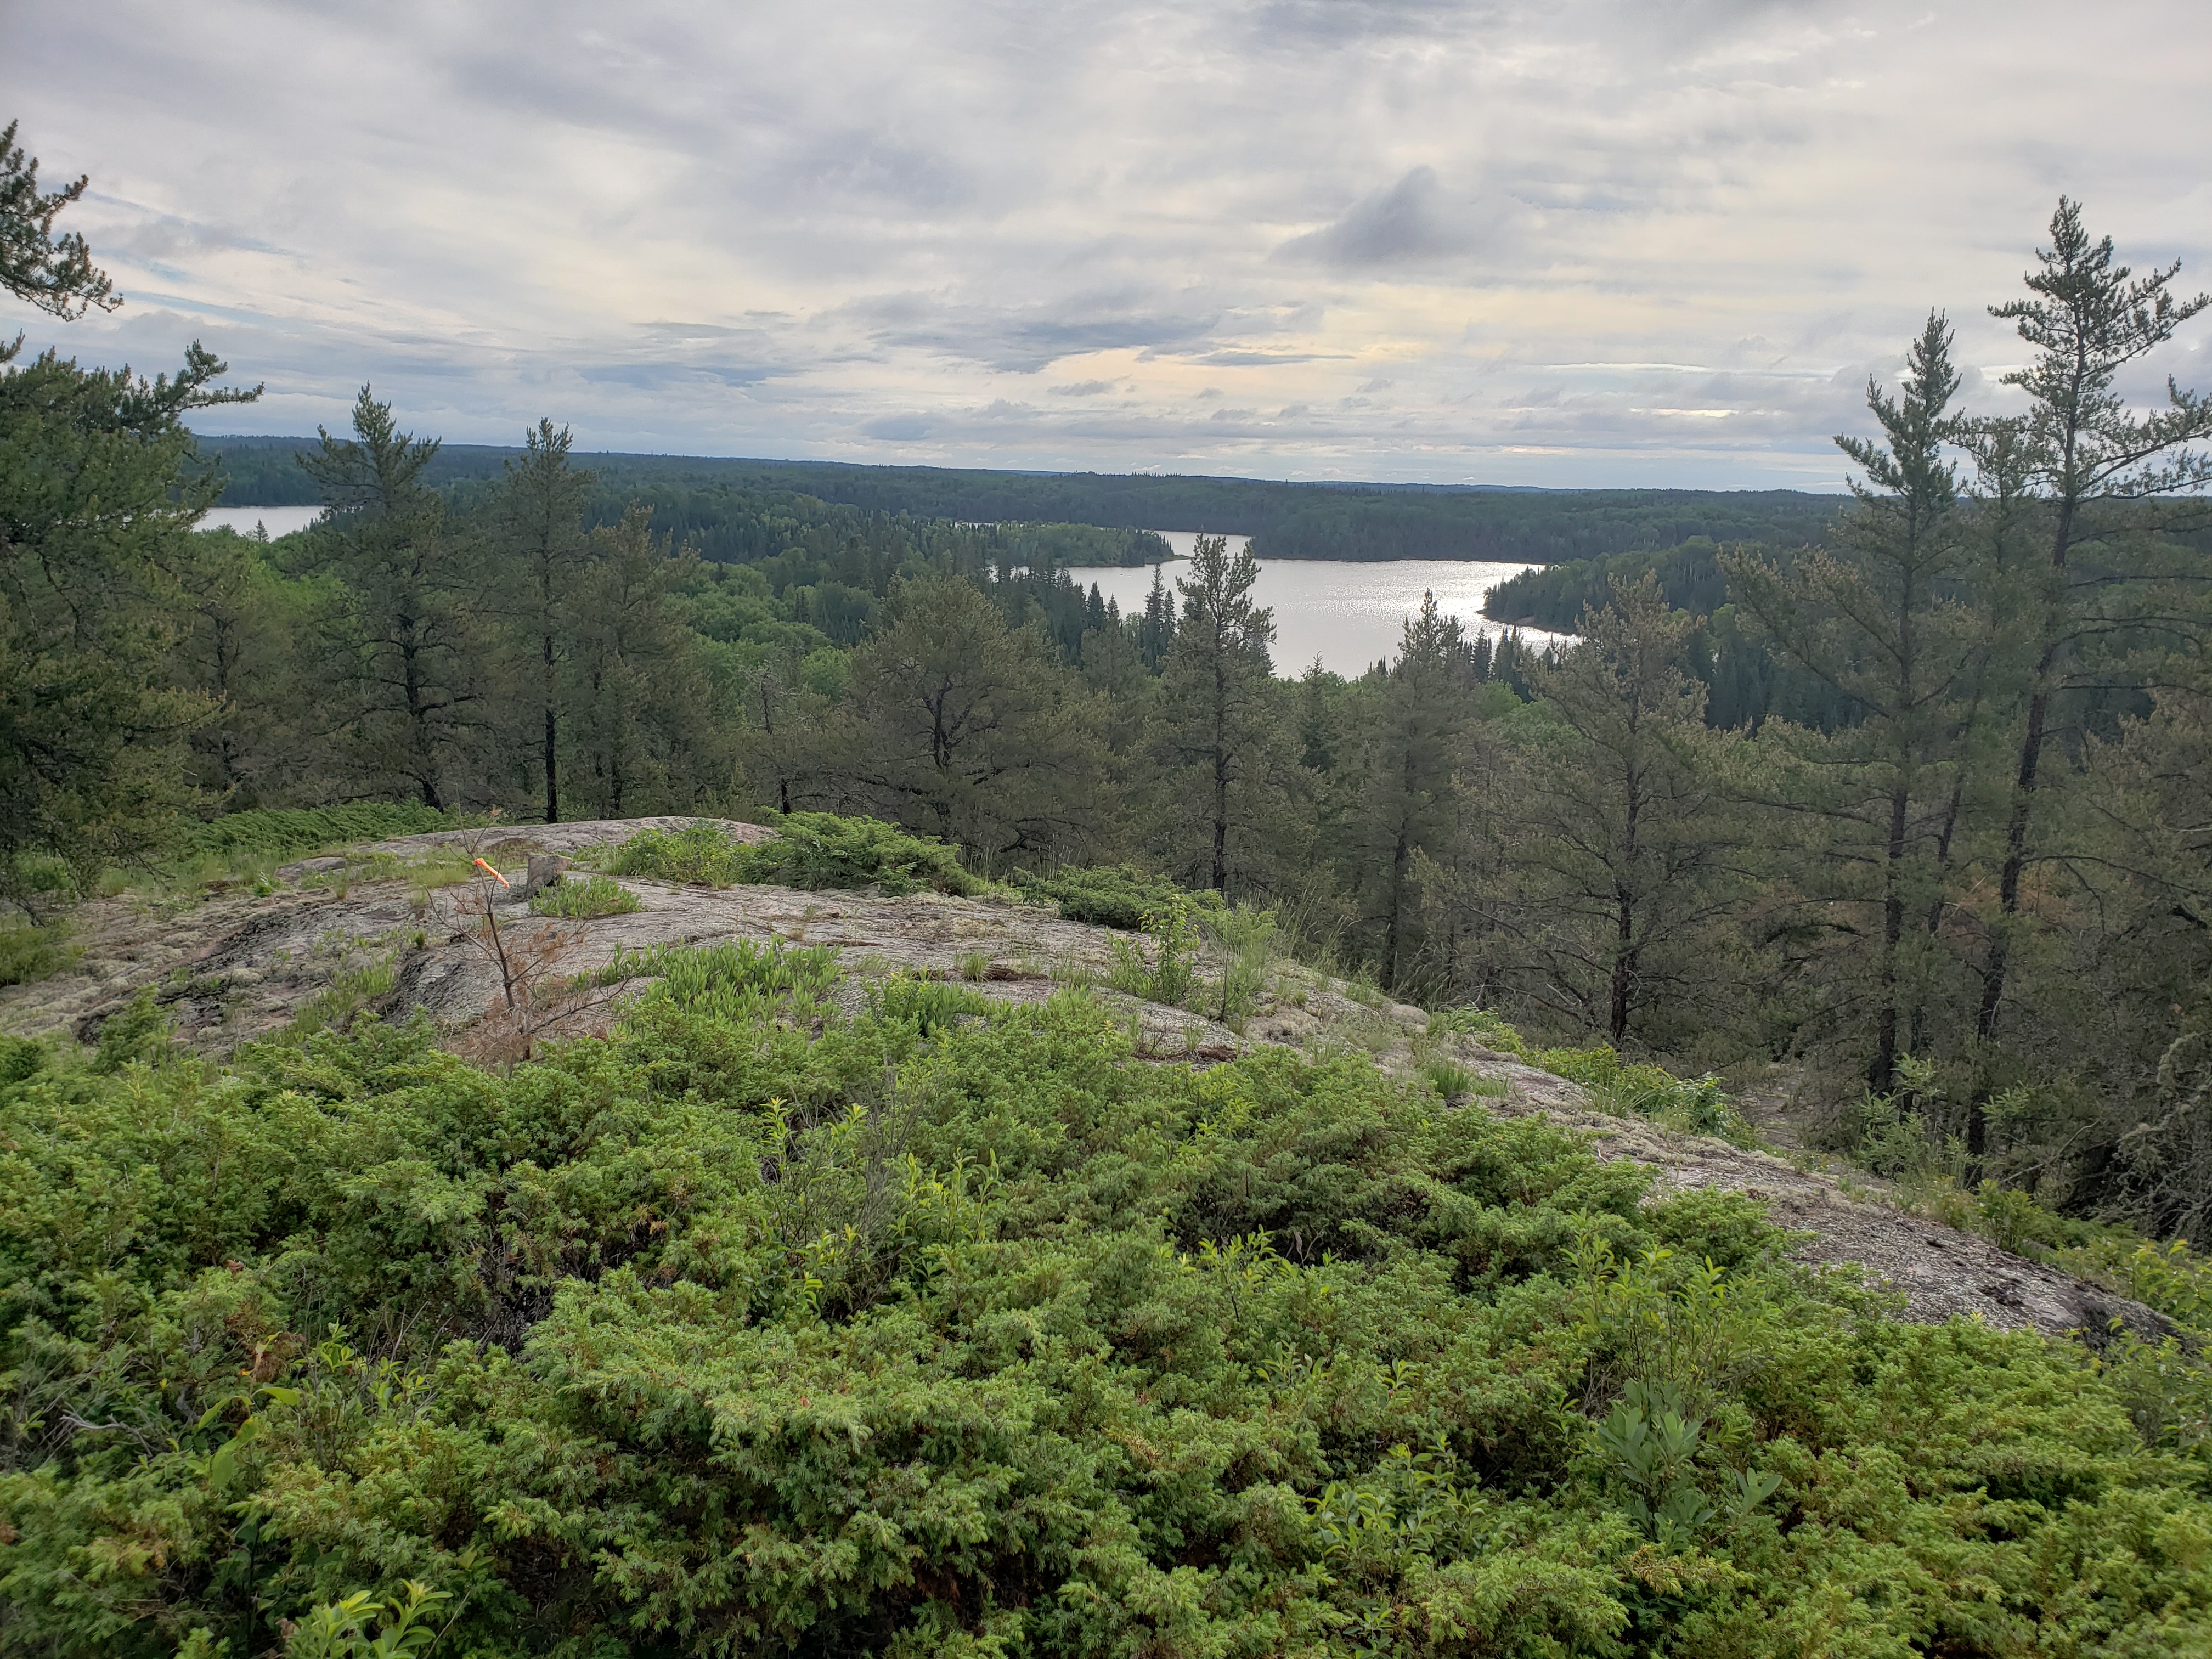 Canadian shield with lakes and forest down below